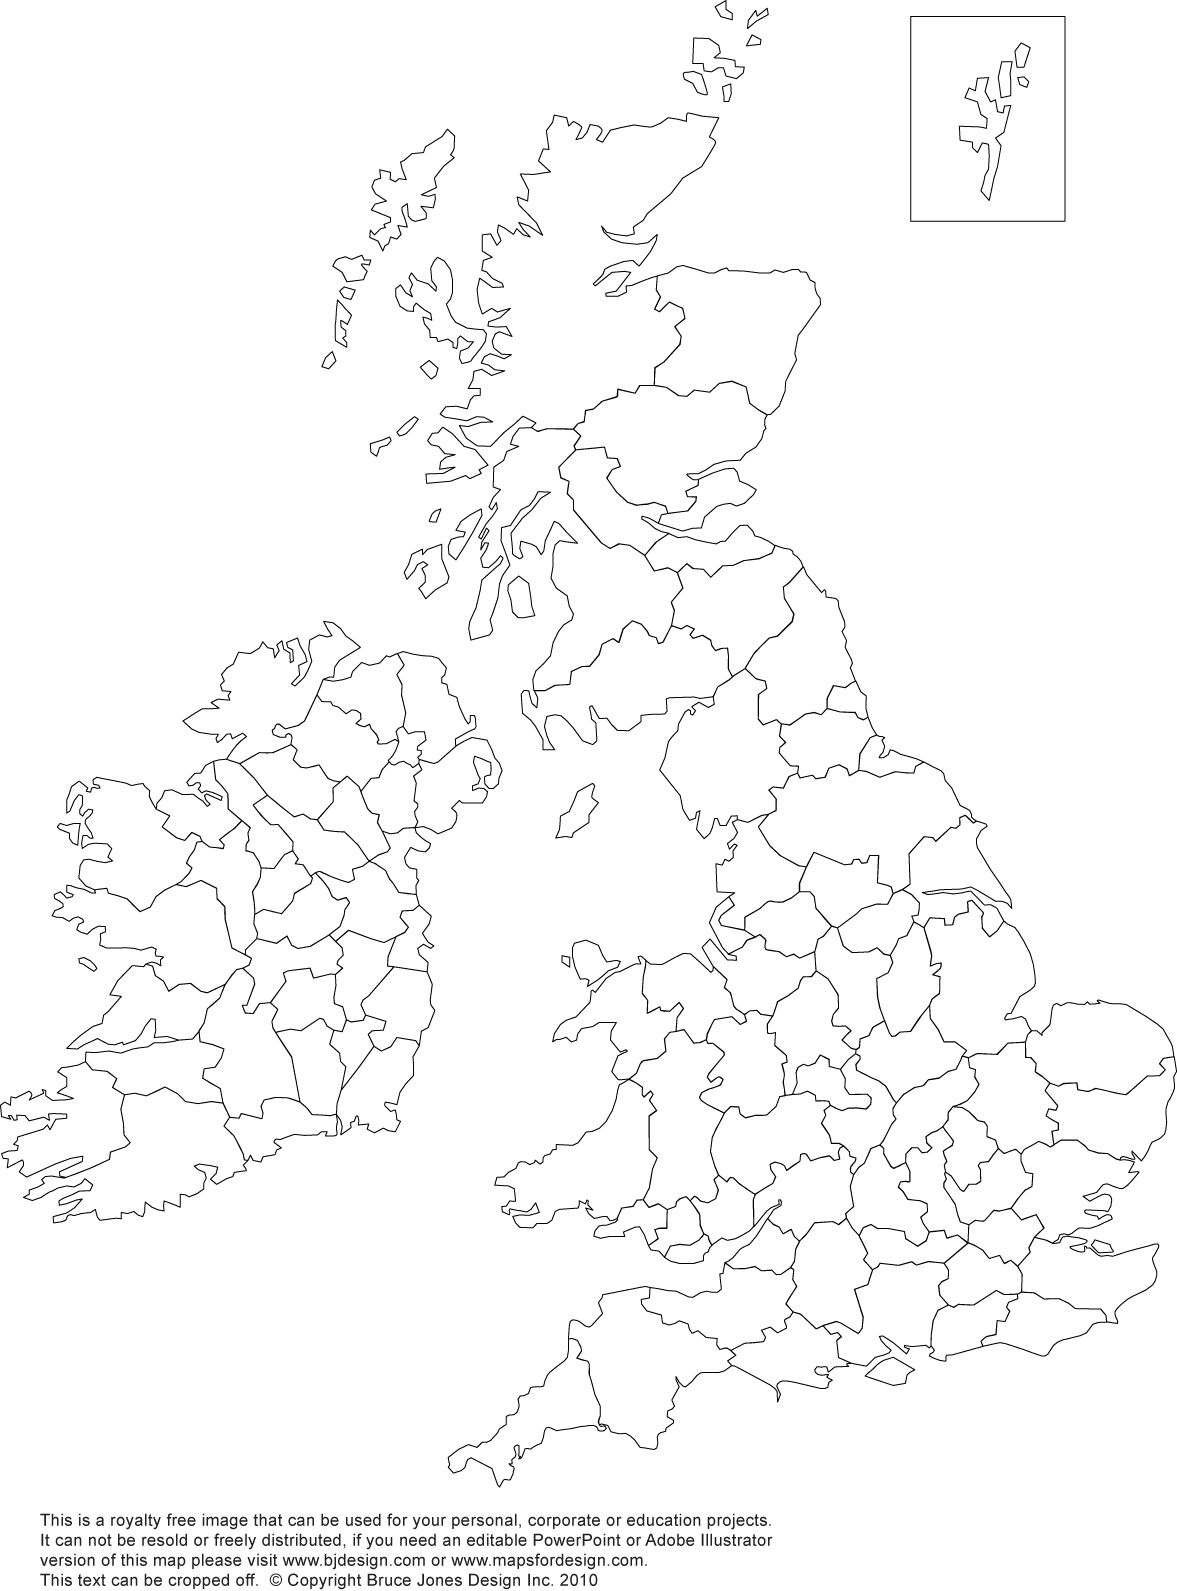 UK Counties Map Blank Geography Pinterest Map Geography And 